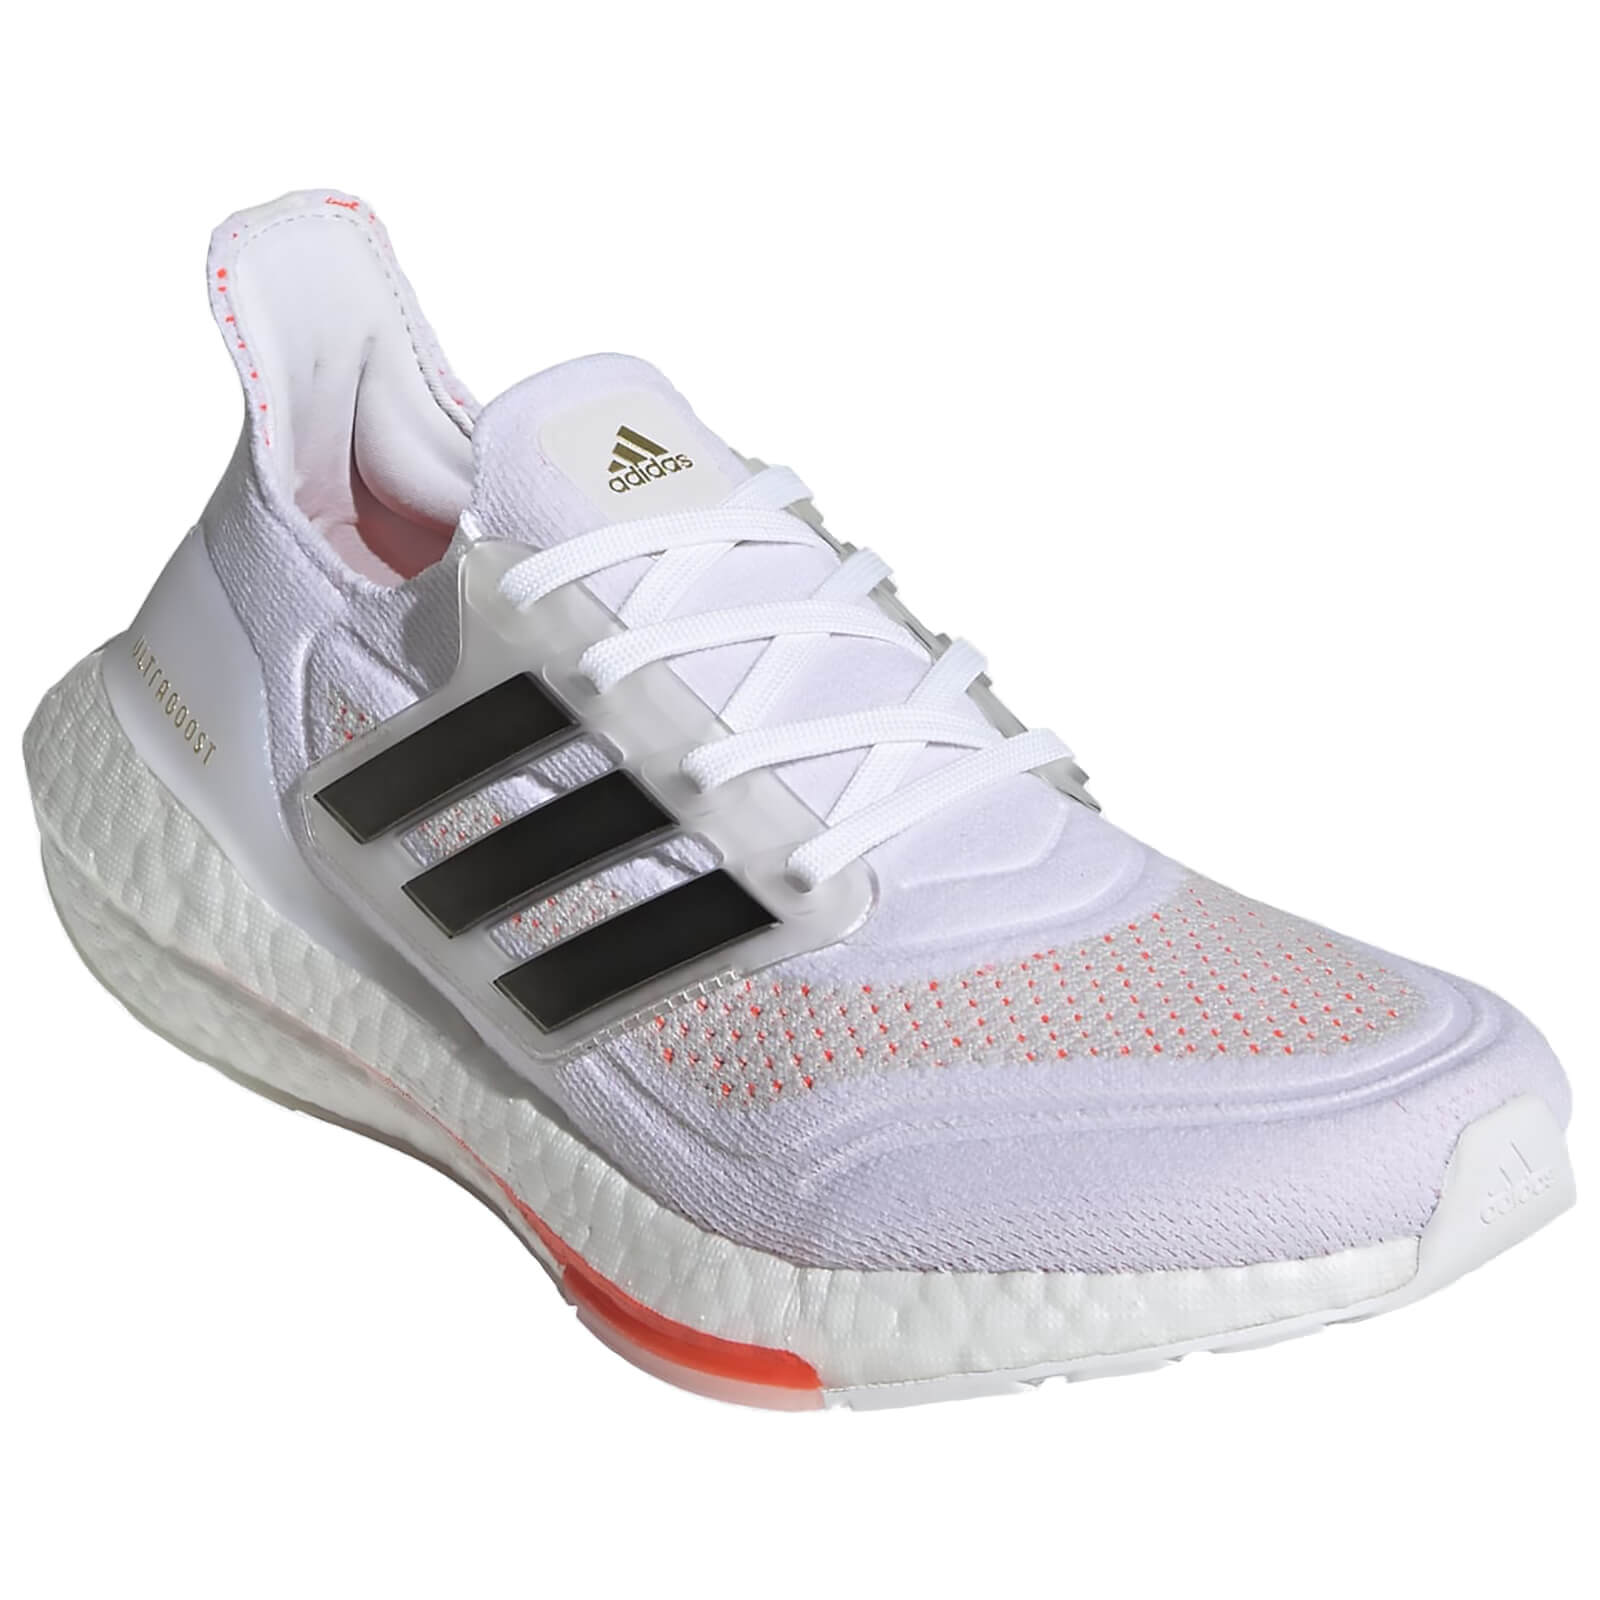 adidas Women's Ultra Boost 21 Running Shoes - Ftwr White/Core Black/Solar Red - US 7.5/UK 6